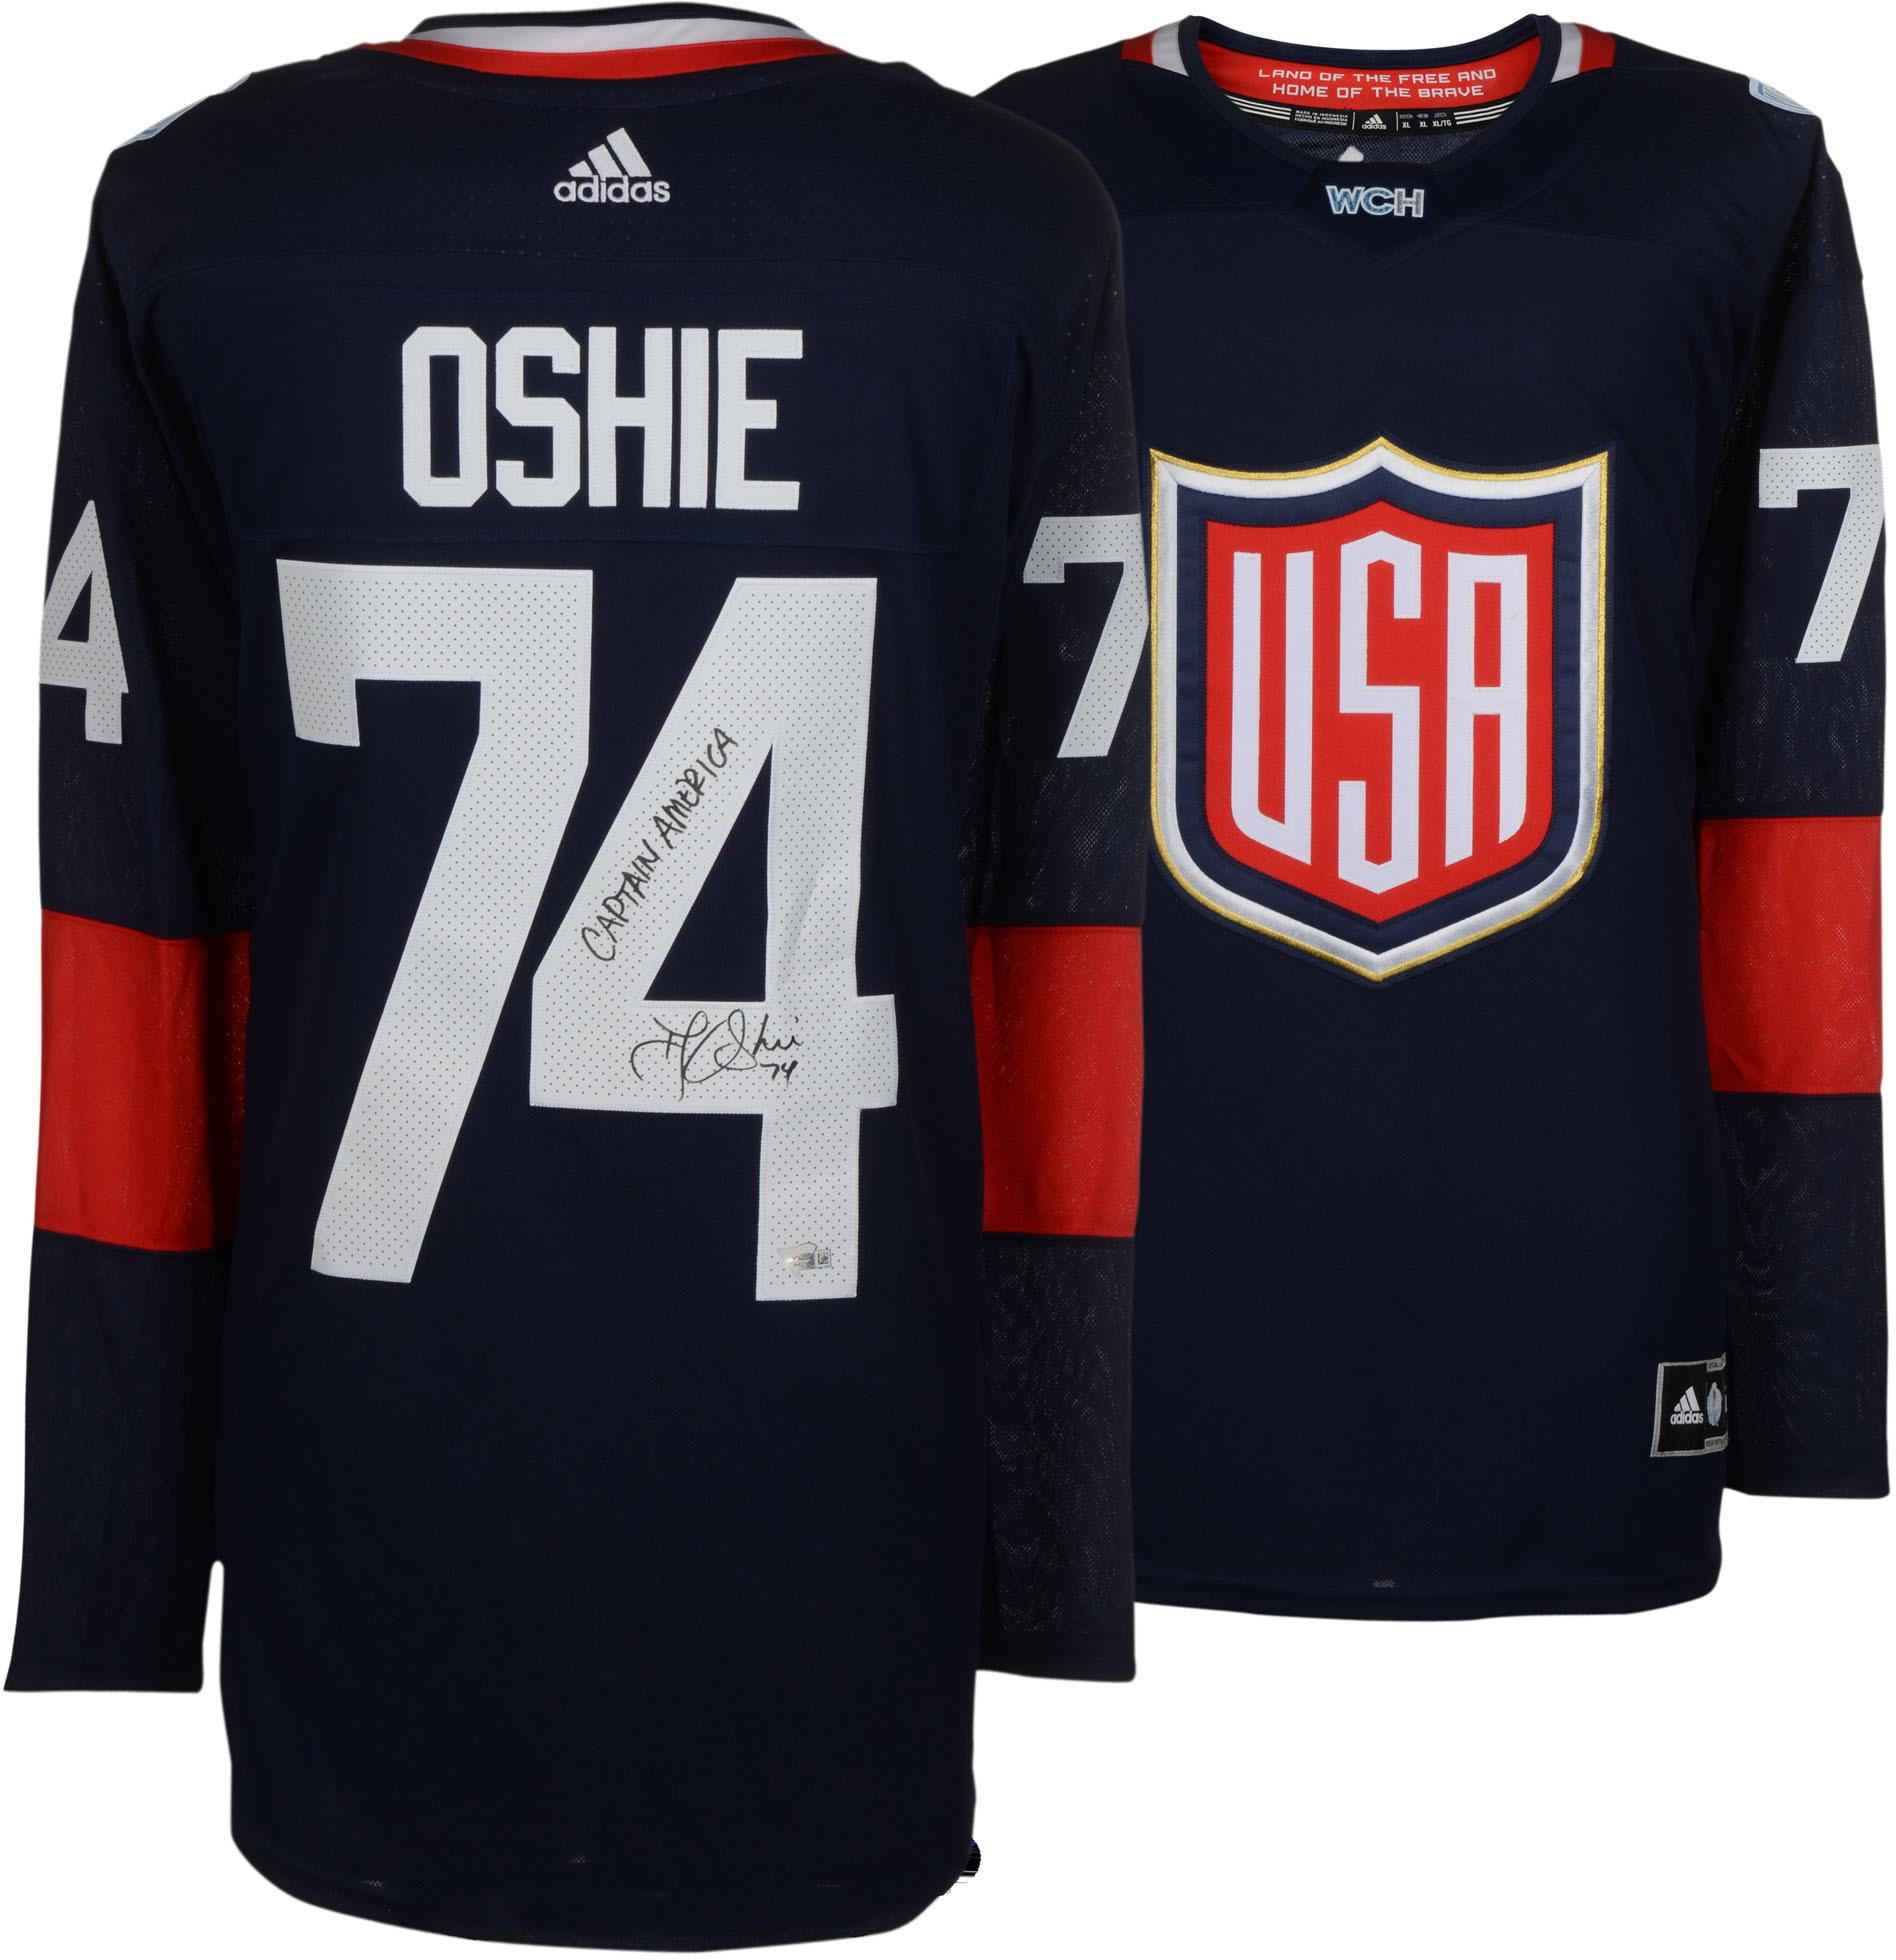 tj oshie world cup jersey